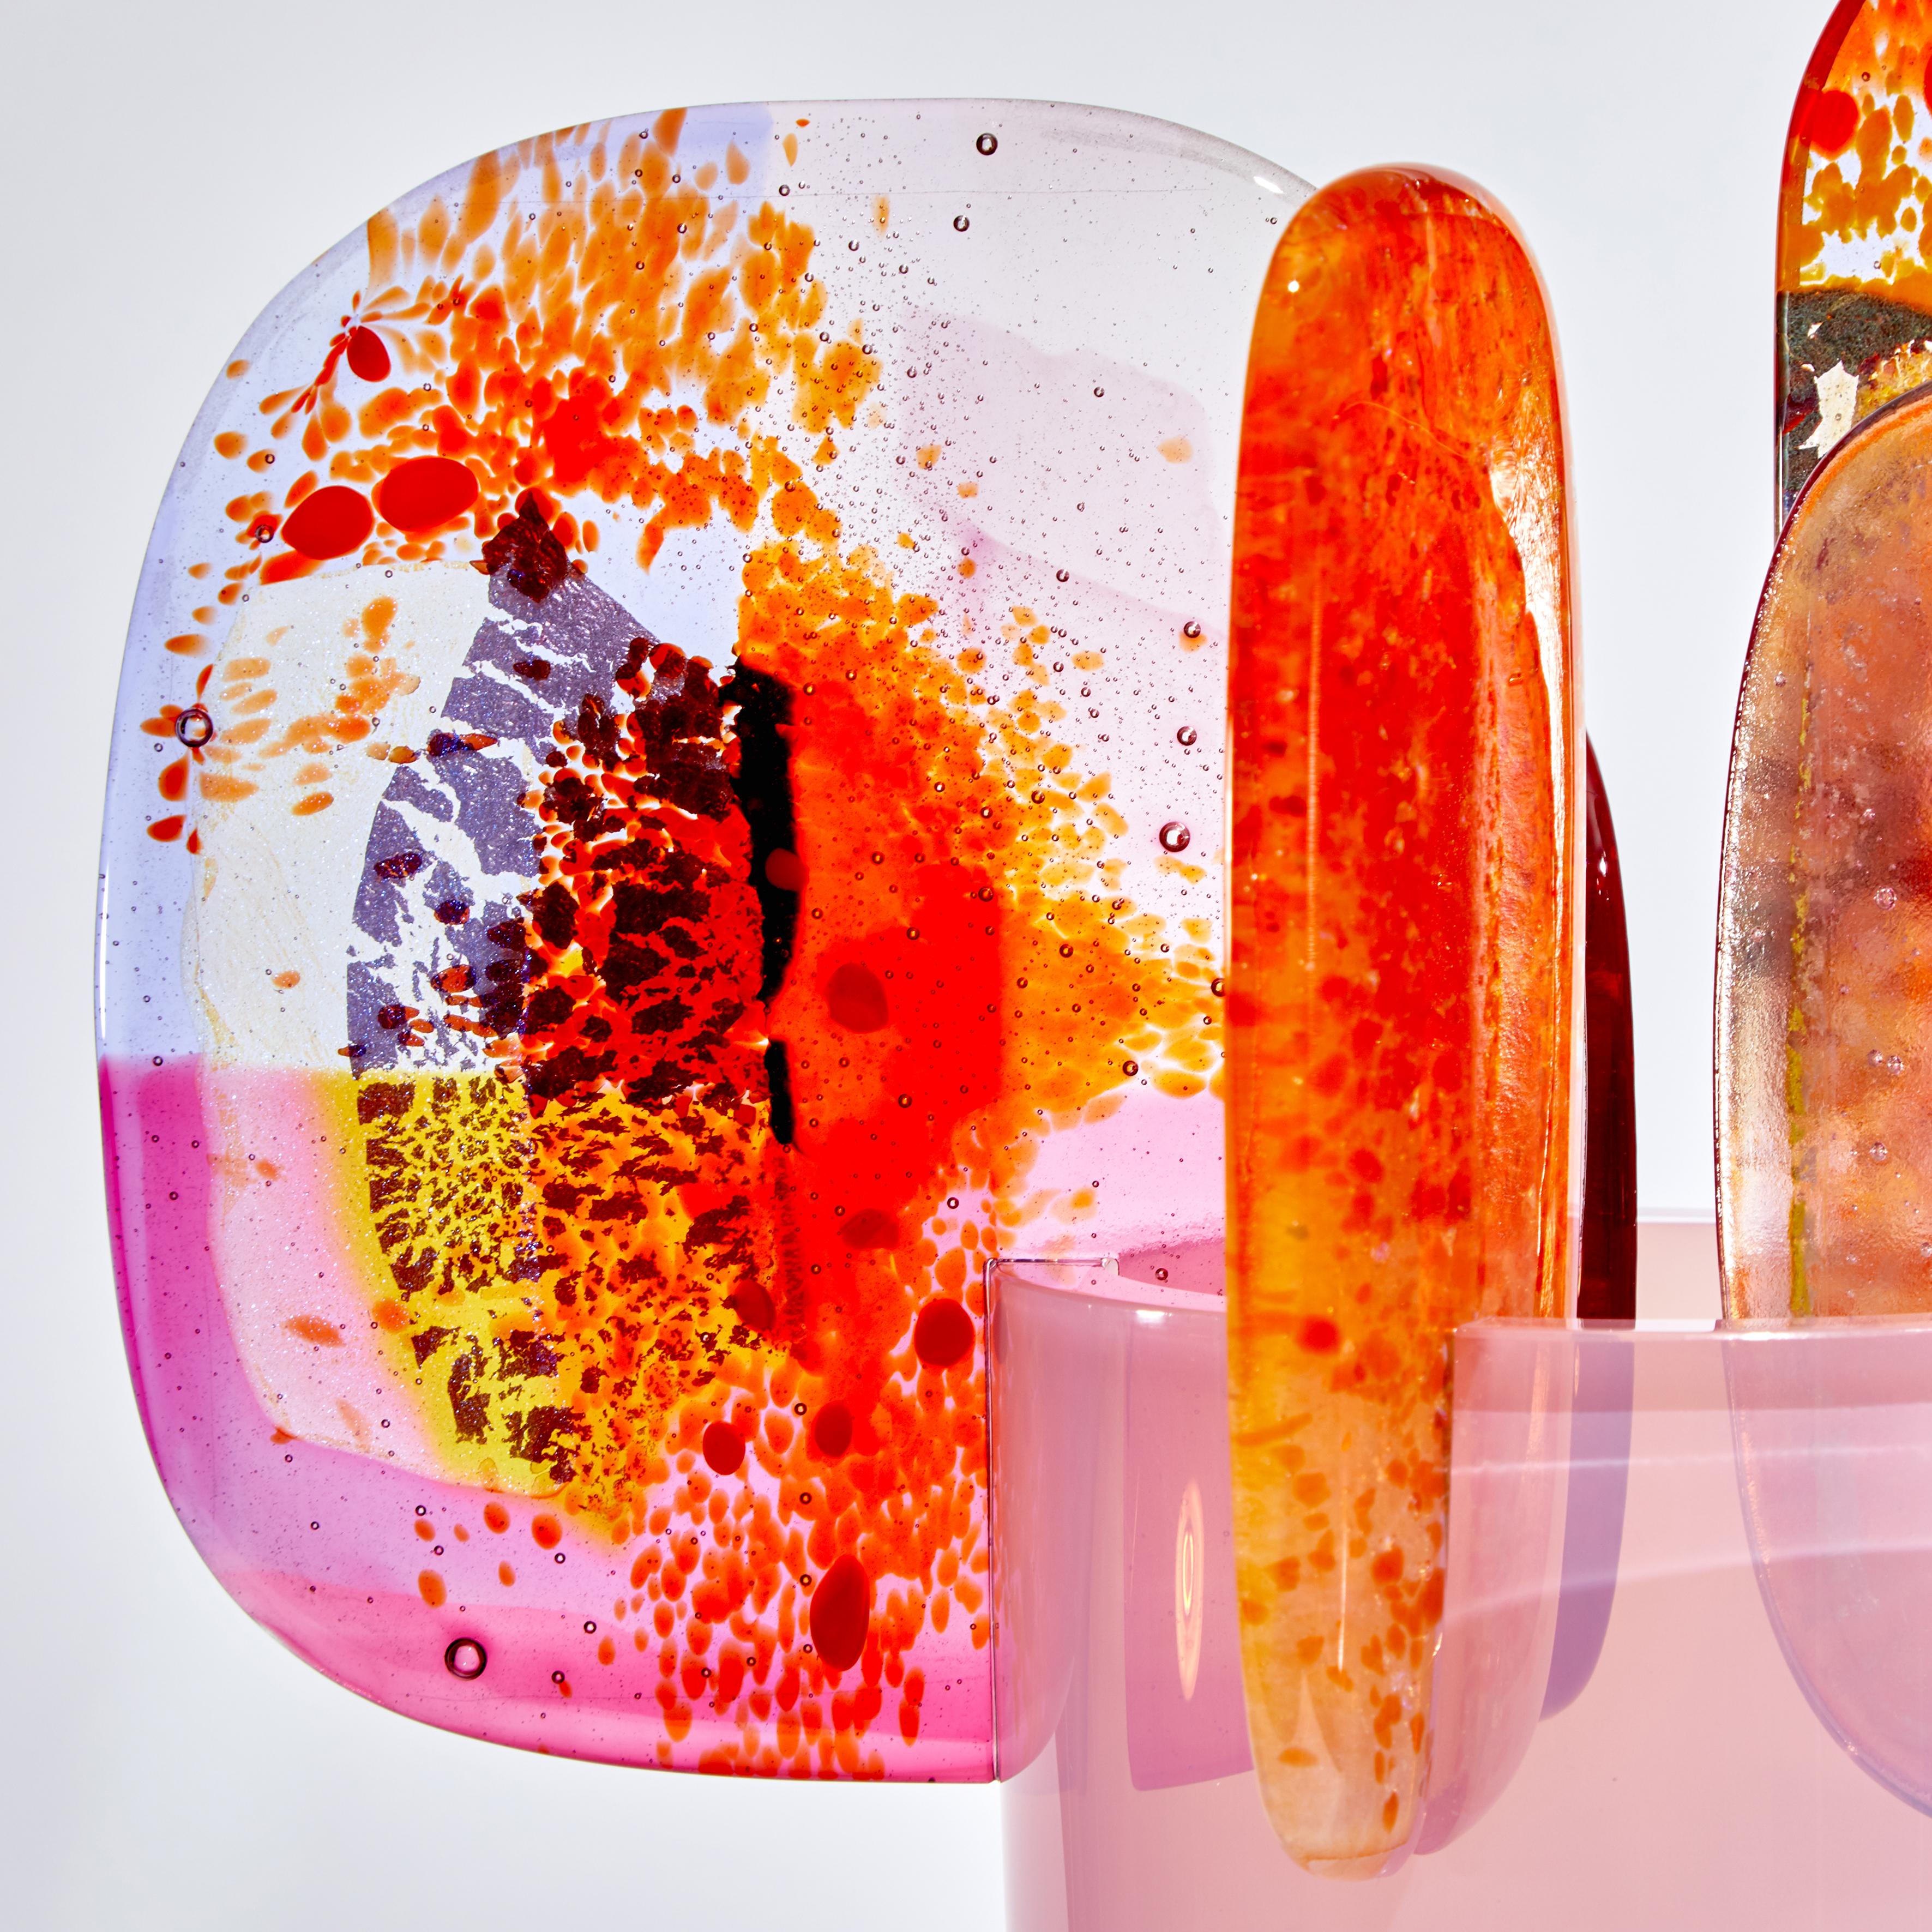 Paradise 01 in Pink, a Unique Pink & Orange Glass Sculpture by Amy Cushing 2